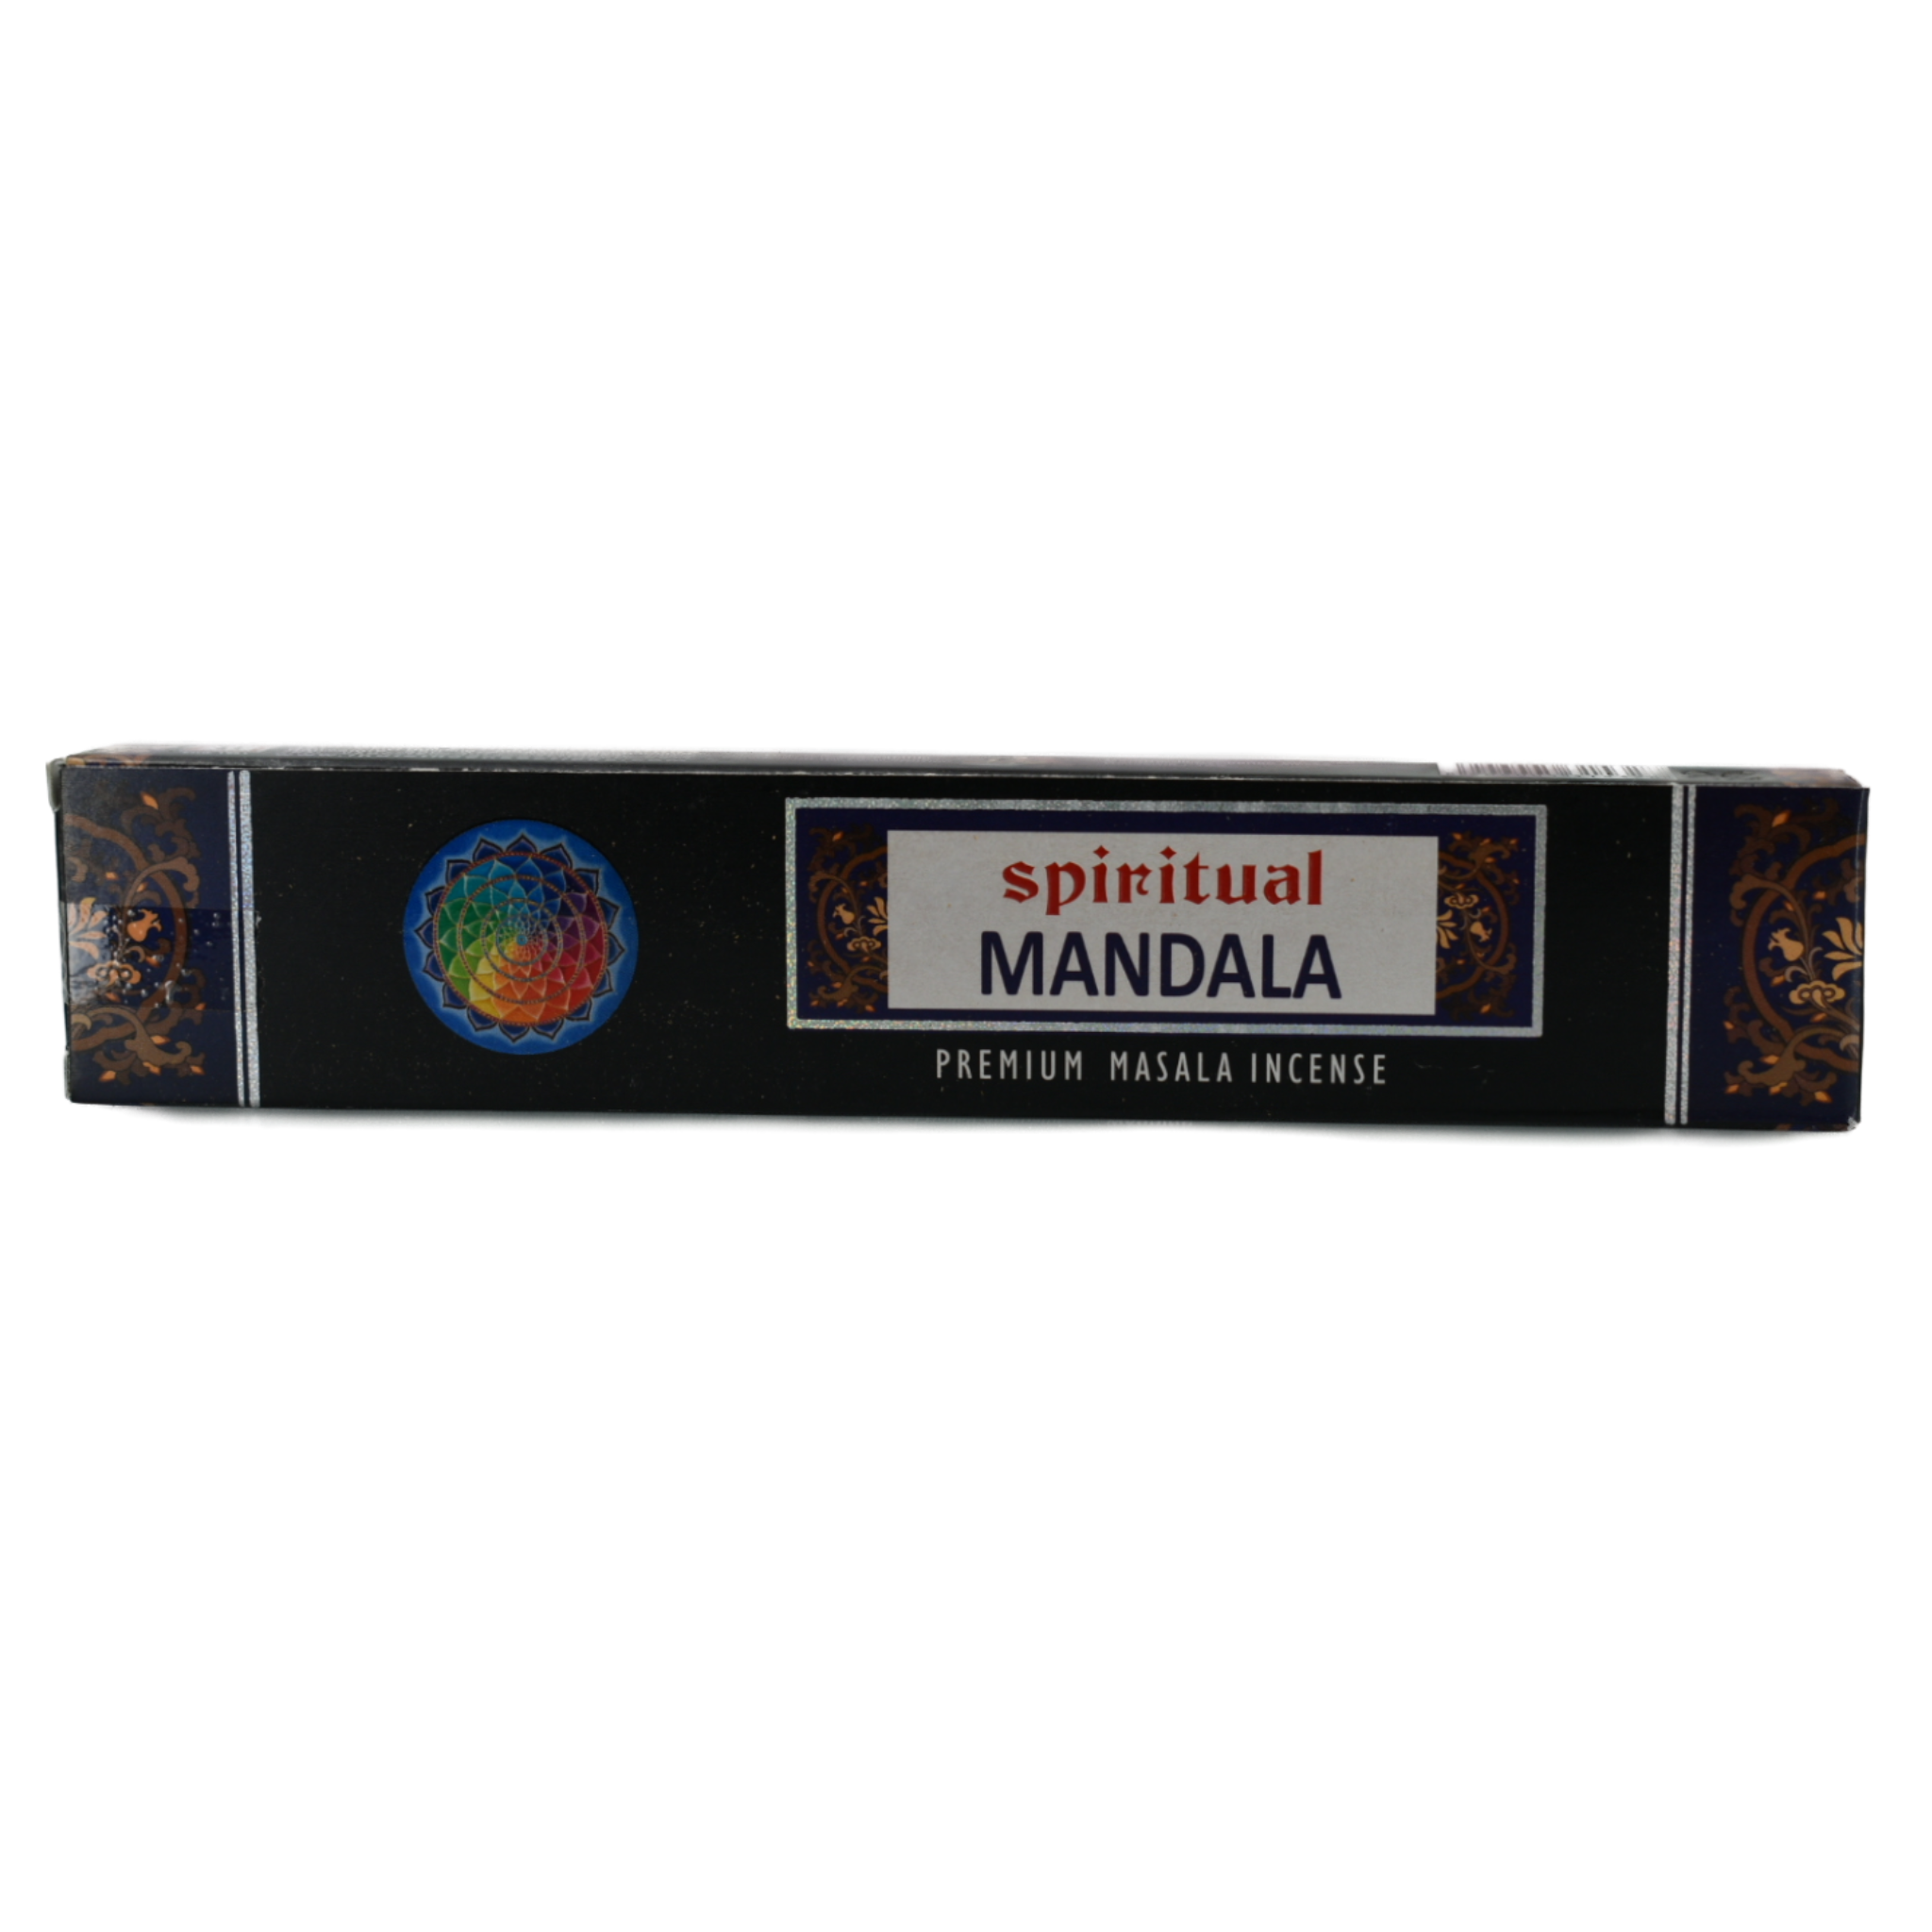 Spiritual Mandala Incense Sticks.  The box is black with brown half circles on both ends that have flowers and leaves on it.  The left side of the box has a lotus flower with 16 pedals within a blue circle.  Inside the petals are the seven chakra colors.  In the middle more towards the right side is the title Spiritual Mandala Premium Masala Incense.  